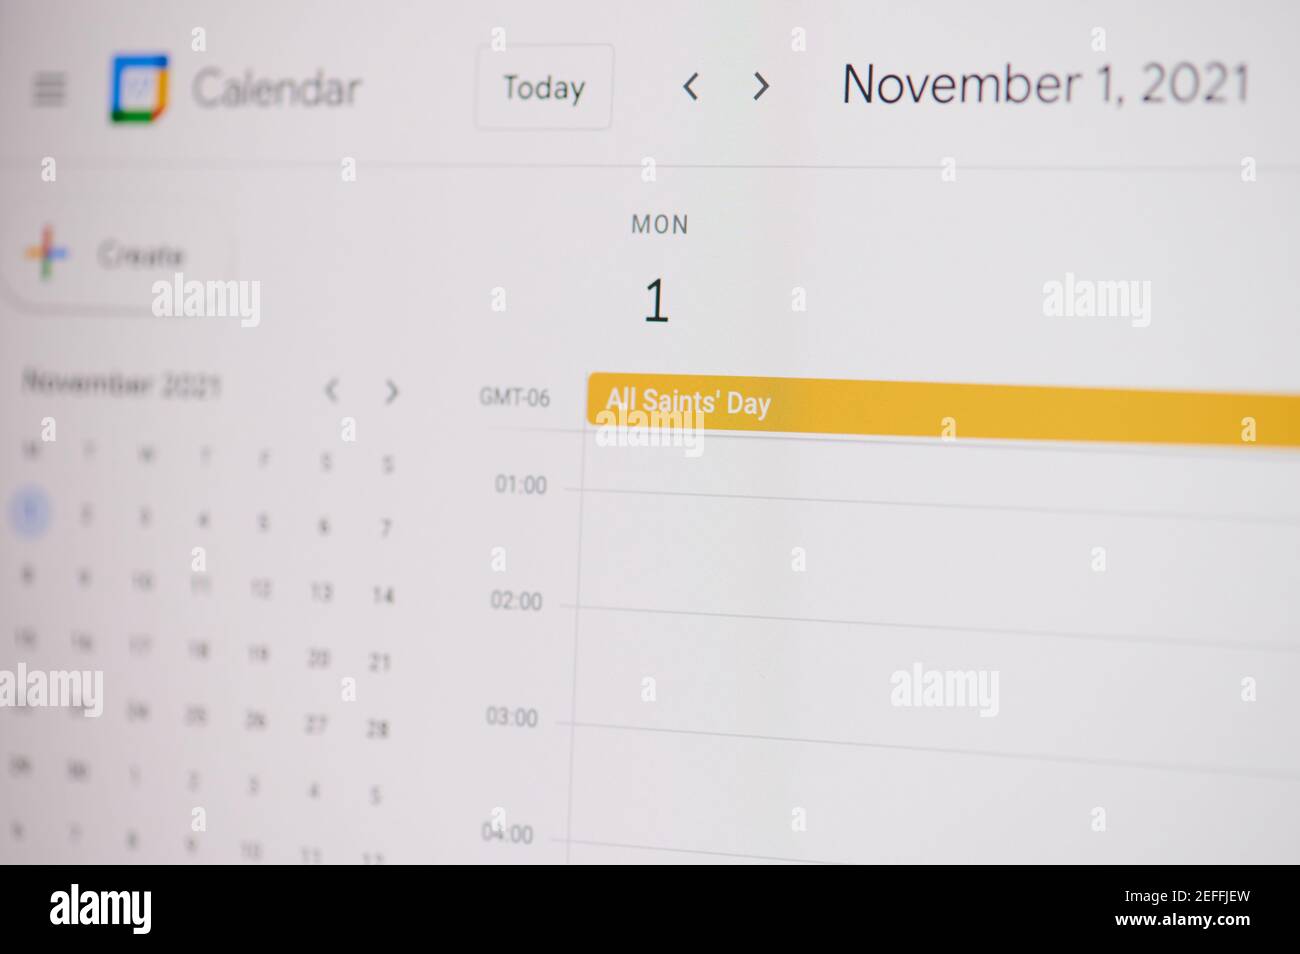 New york, USA - February 17, 2021: All saint day 1 of november  on google calendar on laptop screen close up view. Stock Photo